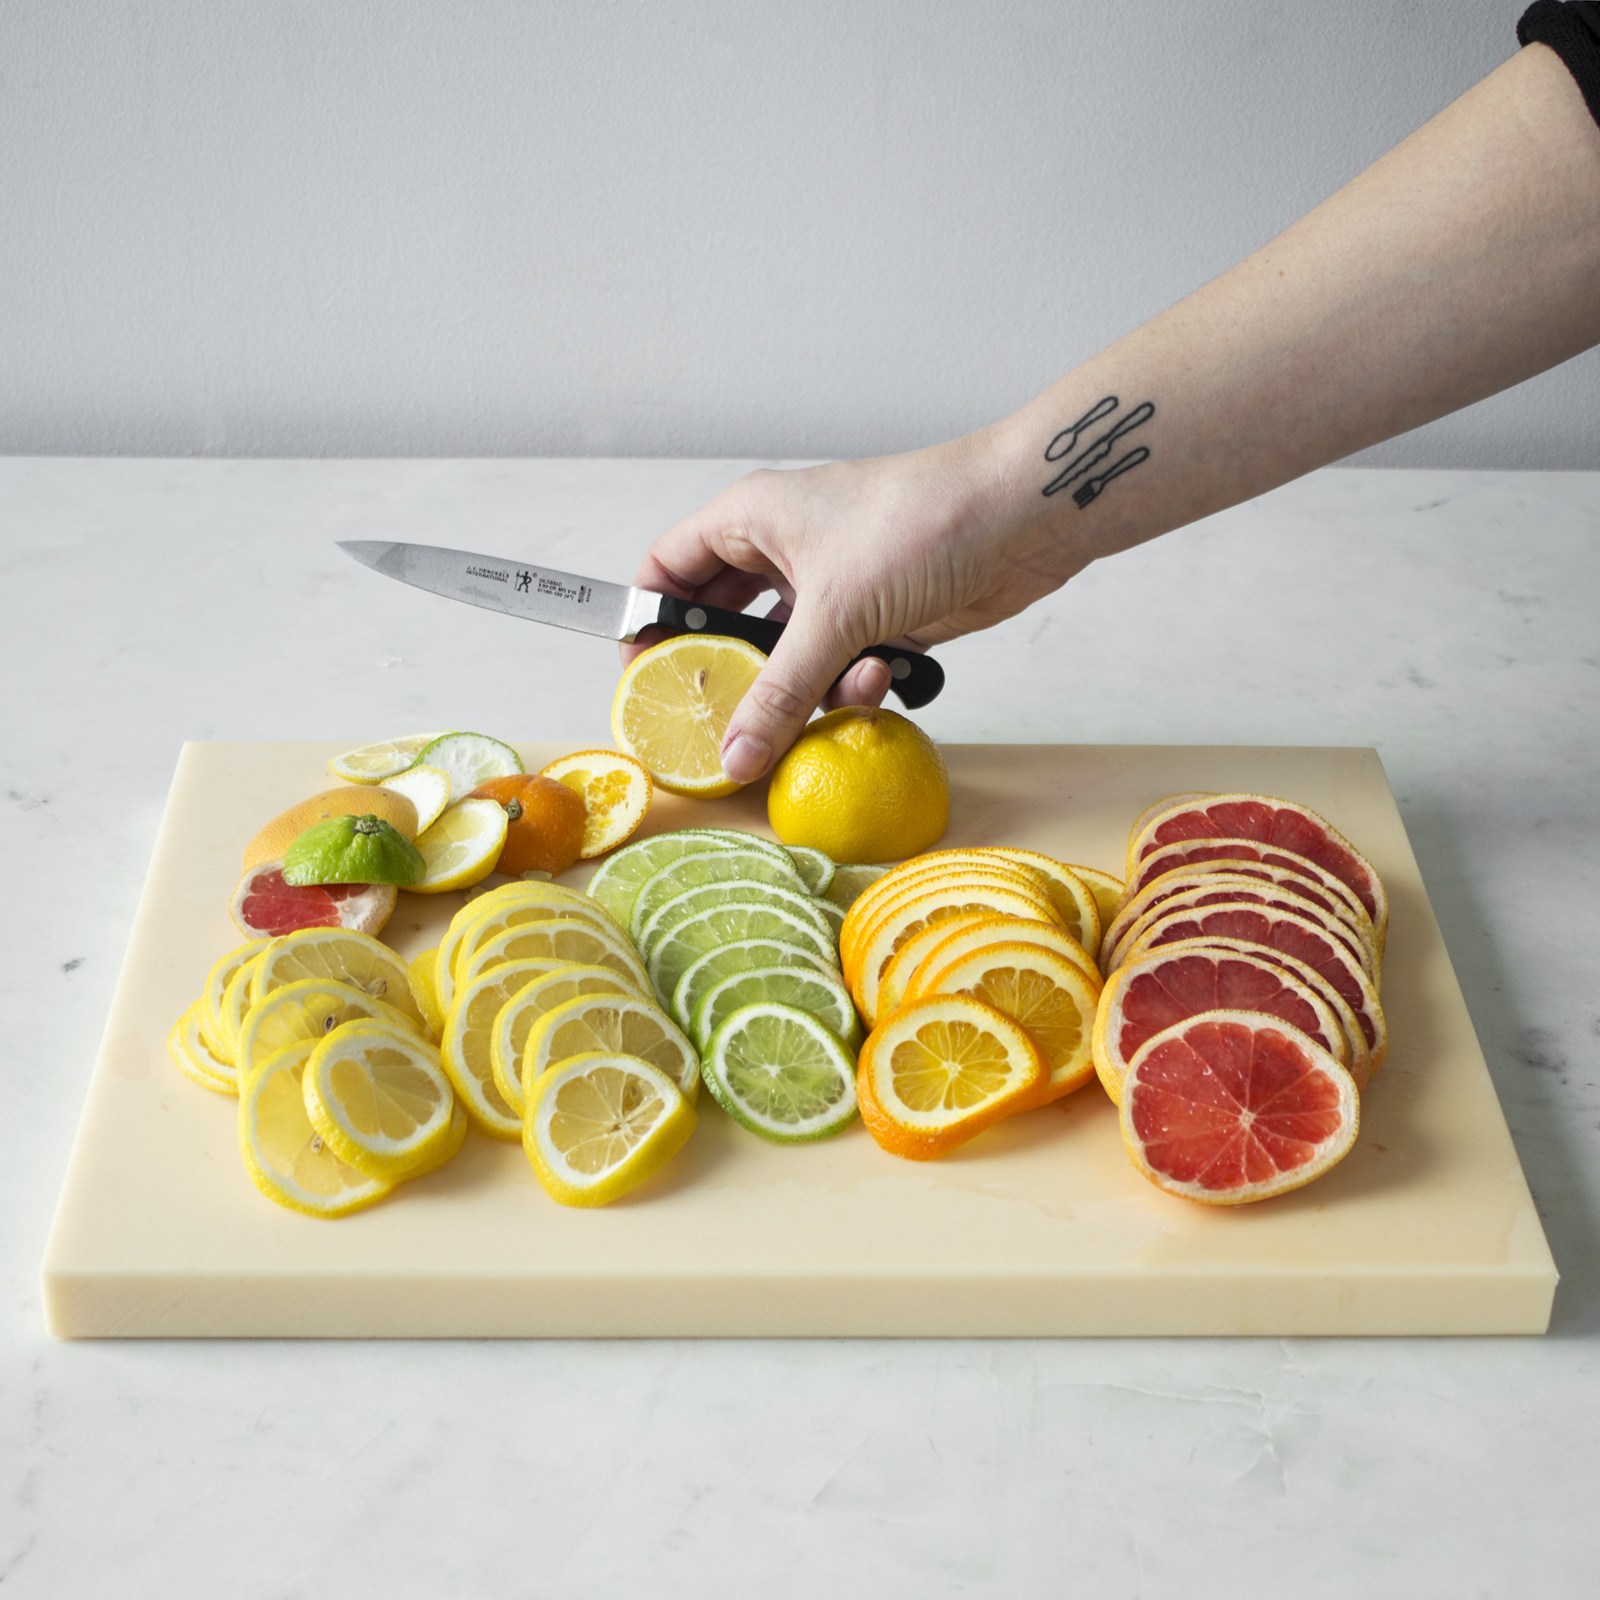 a hand holding a knife and placing lemon on cutting board with yellow, green,orange,red sliced citrus fruits